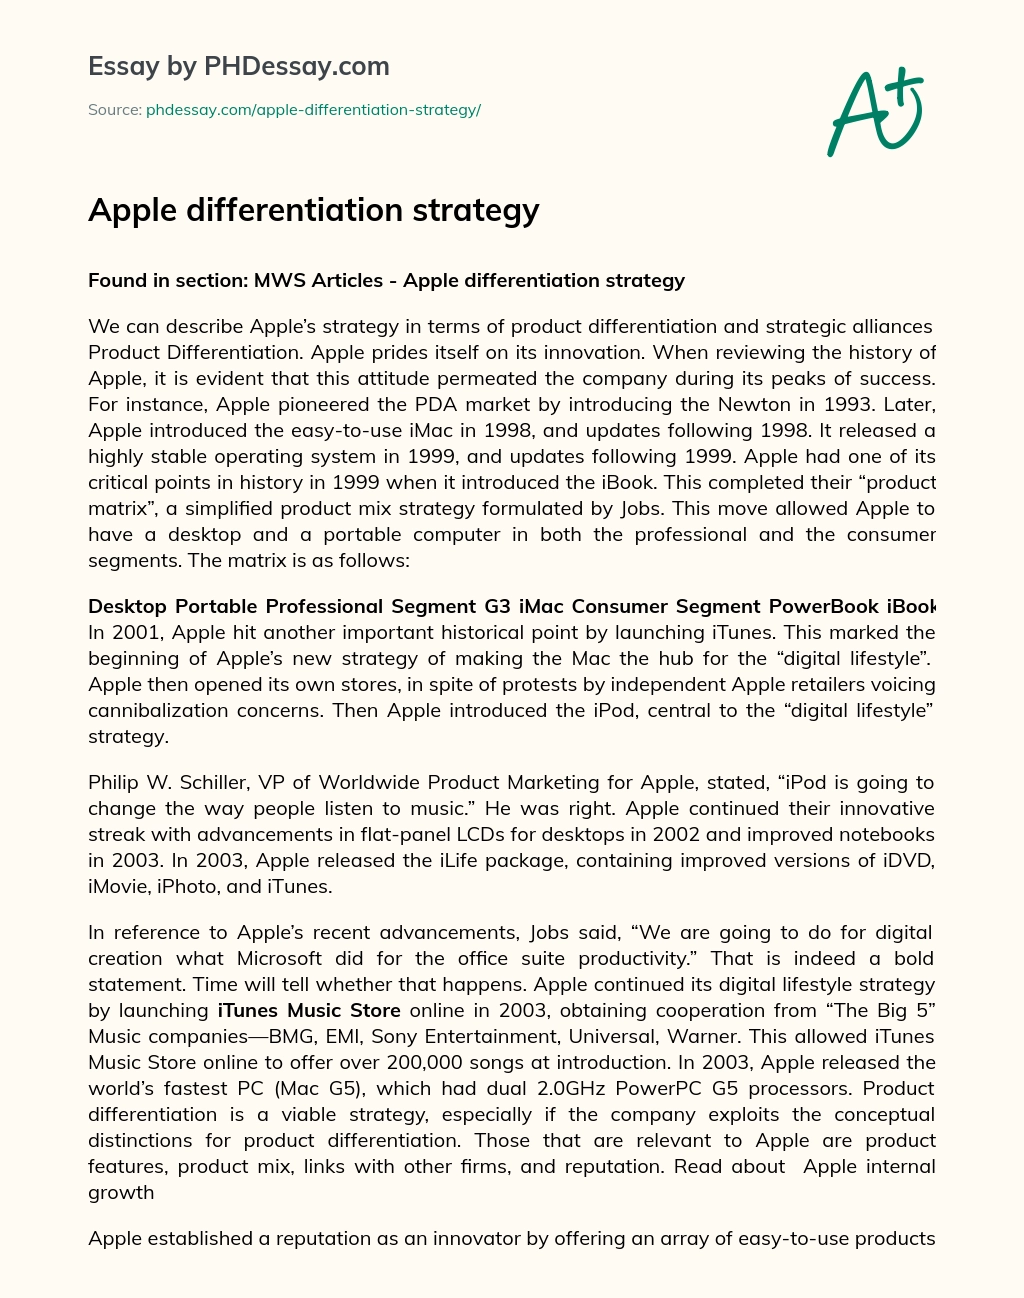 Apple differentiation strategy essay